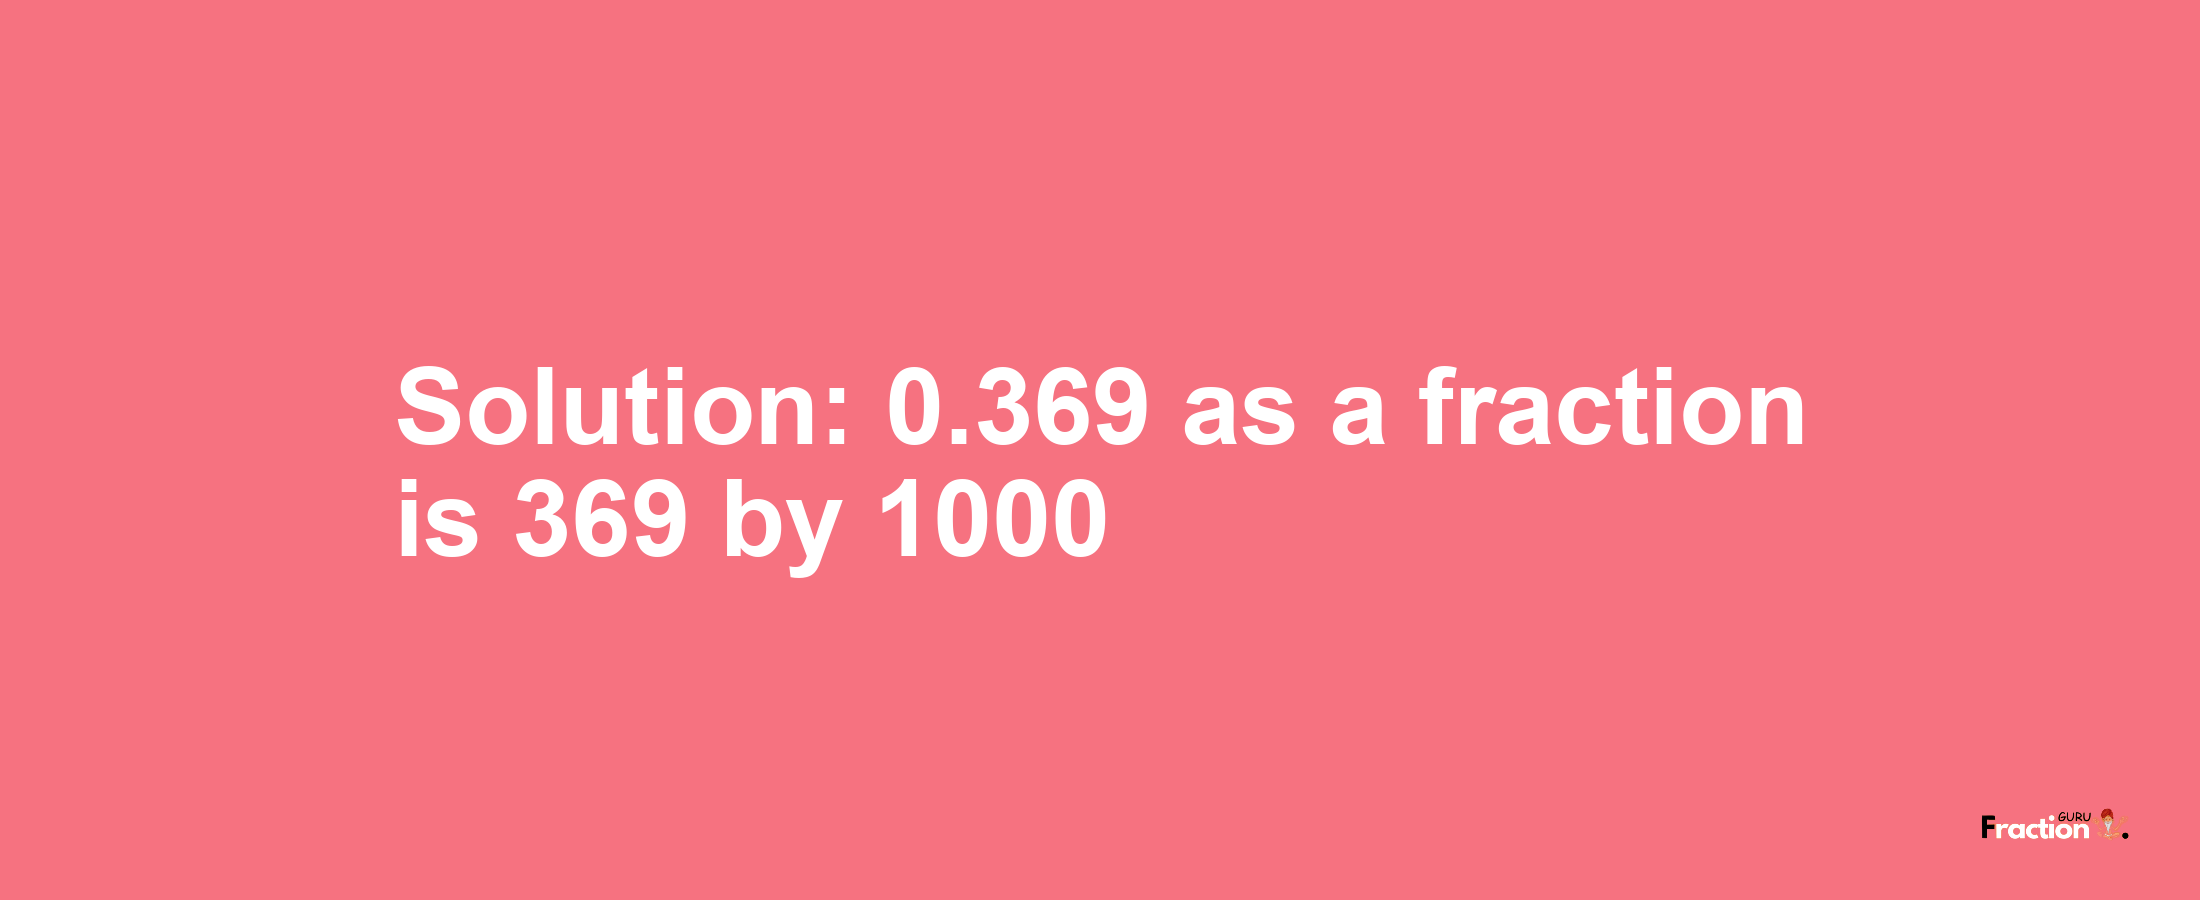 Solution:0.369 as a fraction is 369/1000